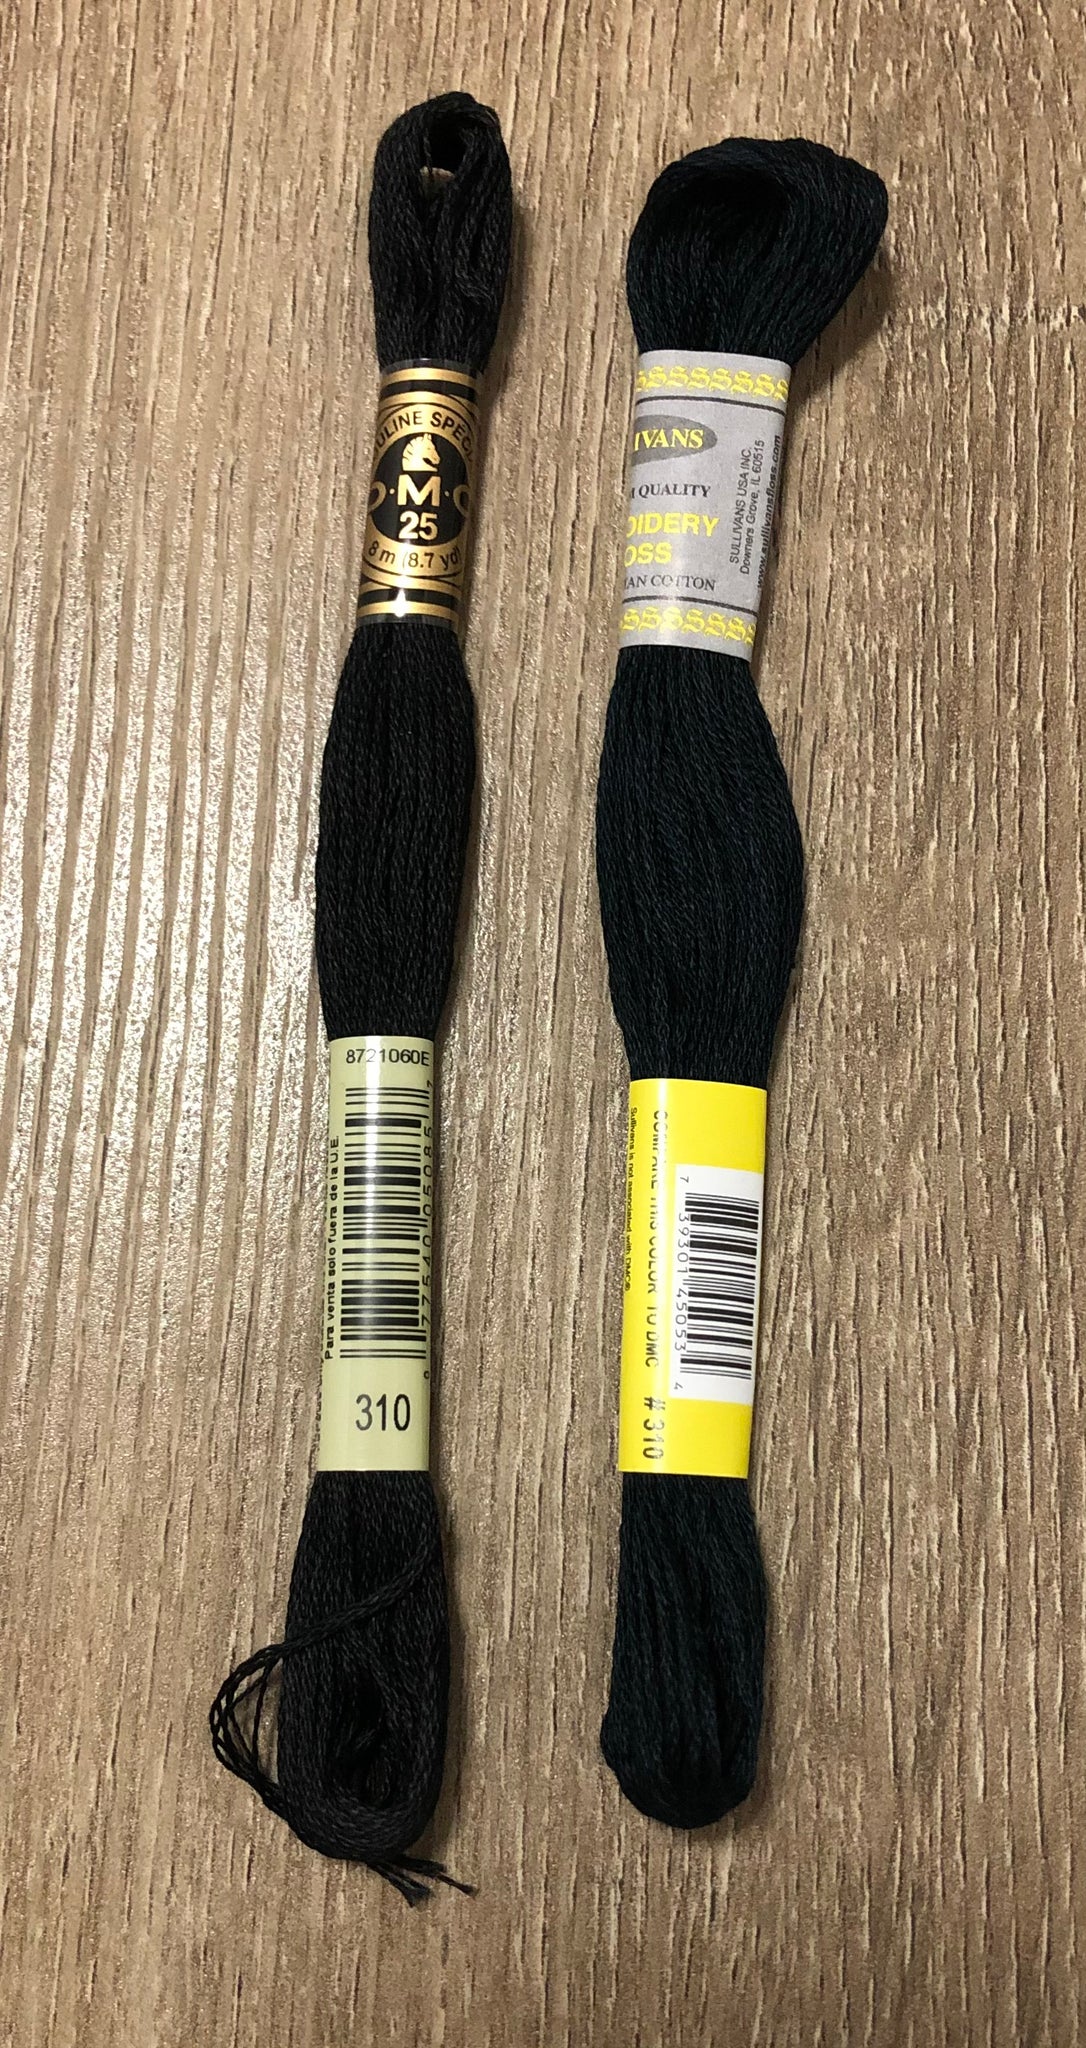 Black 45053 Embroidery Cross Stitch Floss Thread - Compares to DMC